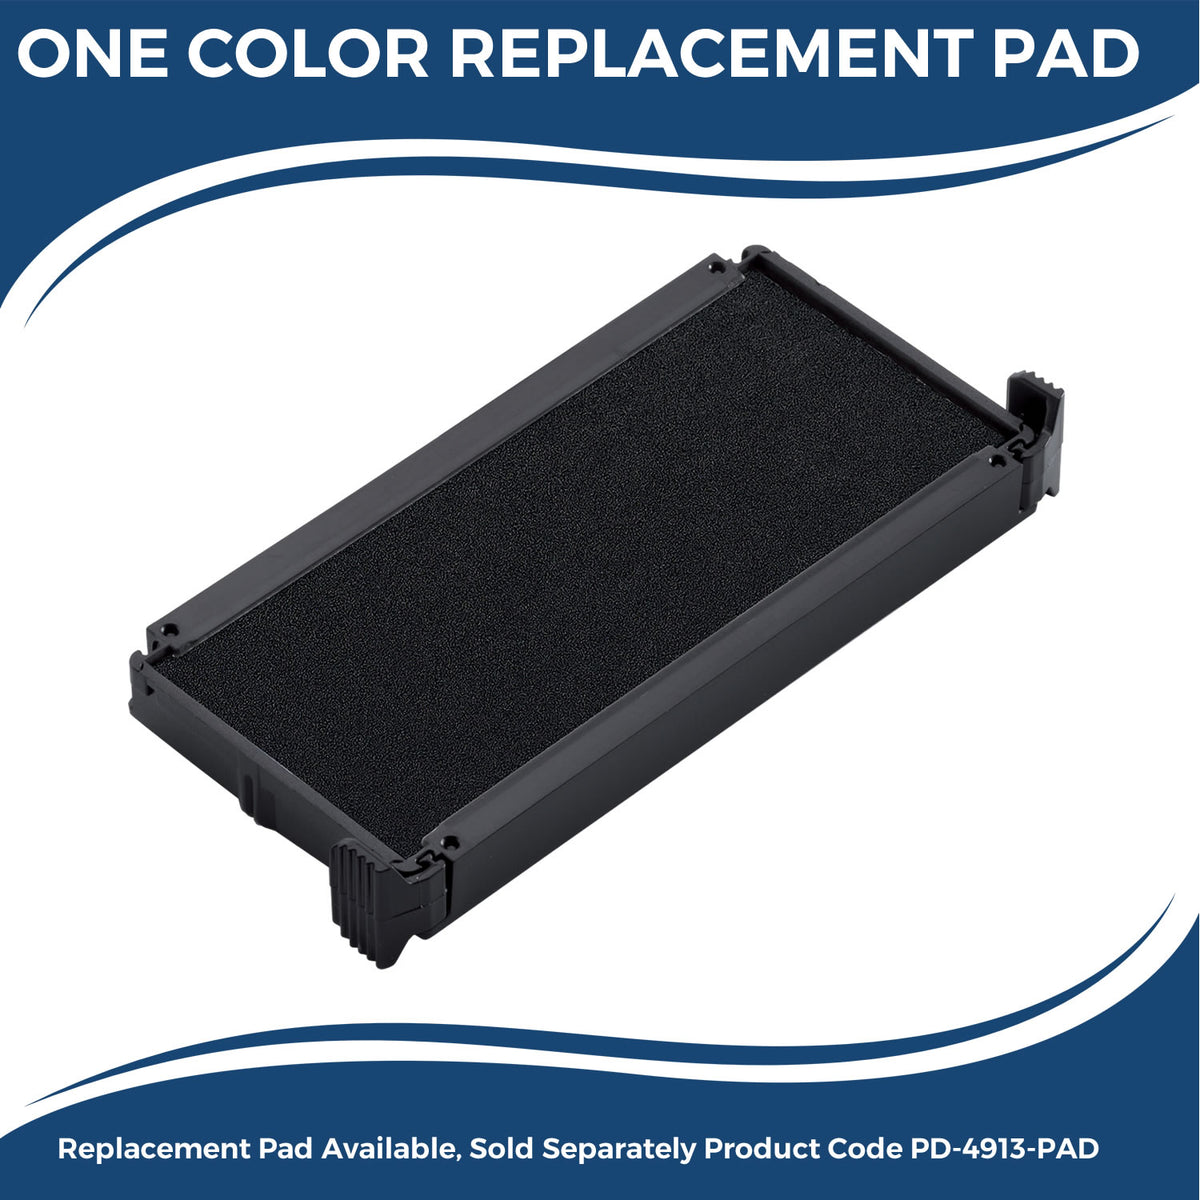 Large Self-Inking Optima Confidential Stamp 4886S Large Replacment Pad